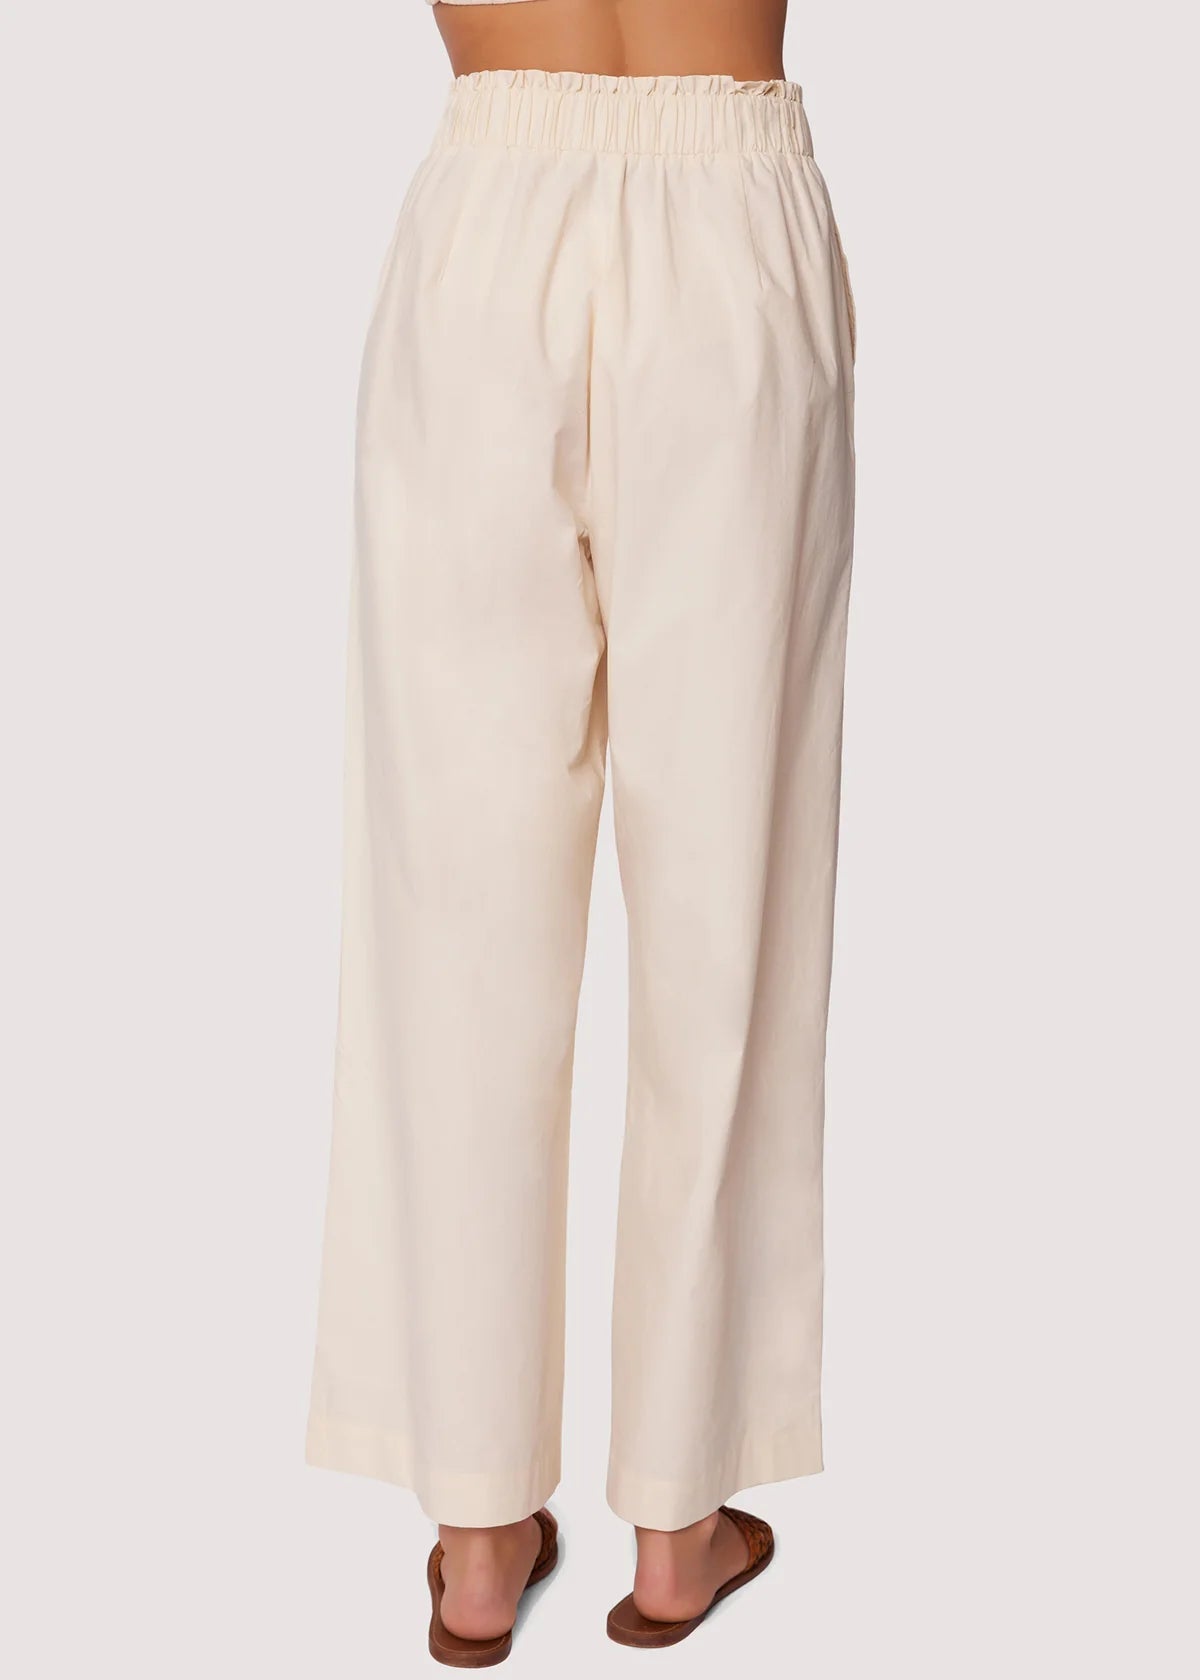 Sunny Business Pants - Off White